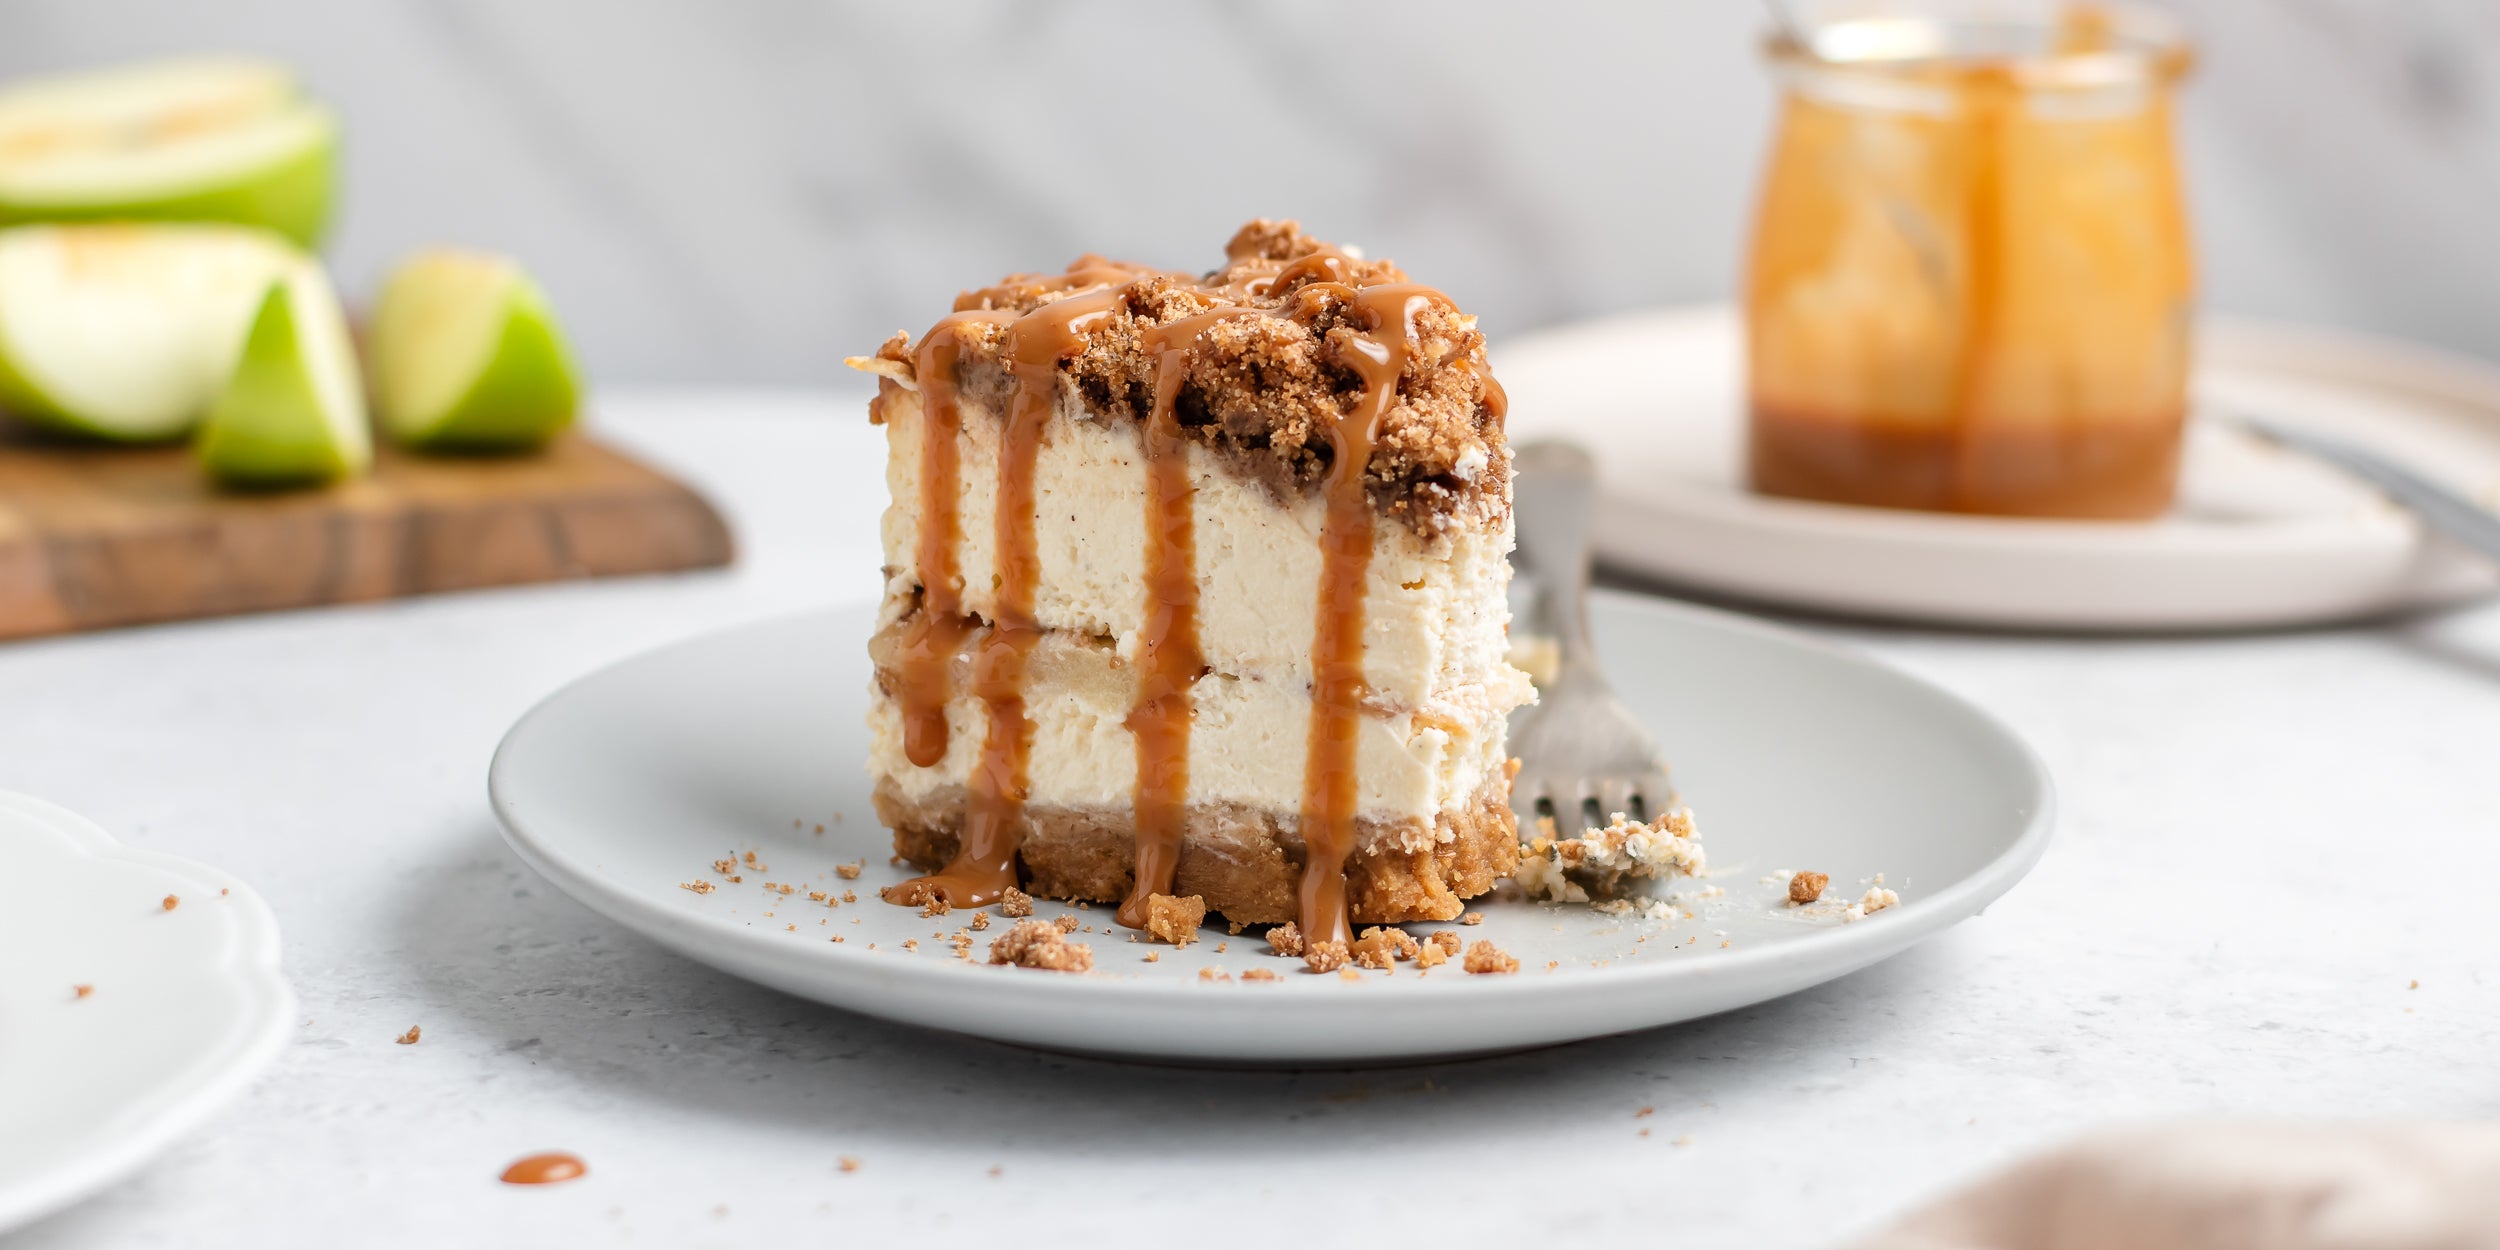 Close up of a slice of Apple Crumble Cheesecake showing the inside layer of finely sliced apples, drizzled with caramel sauce